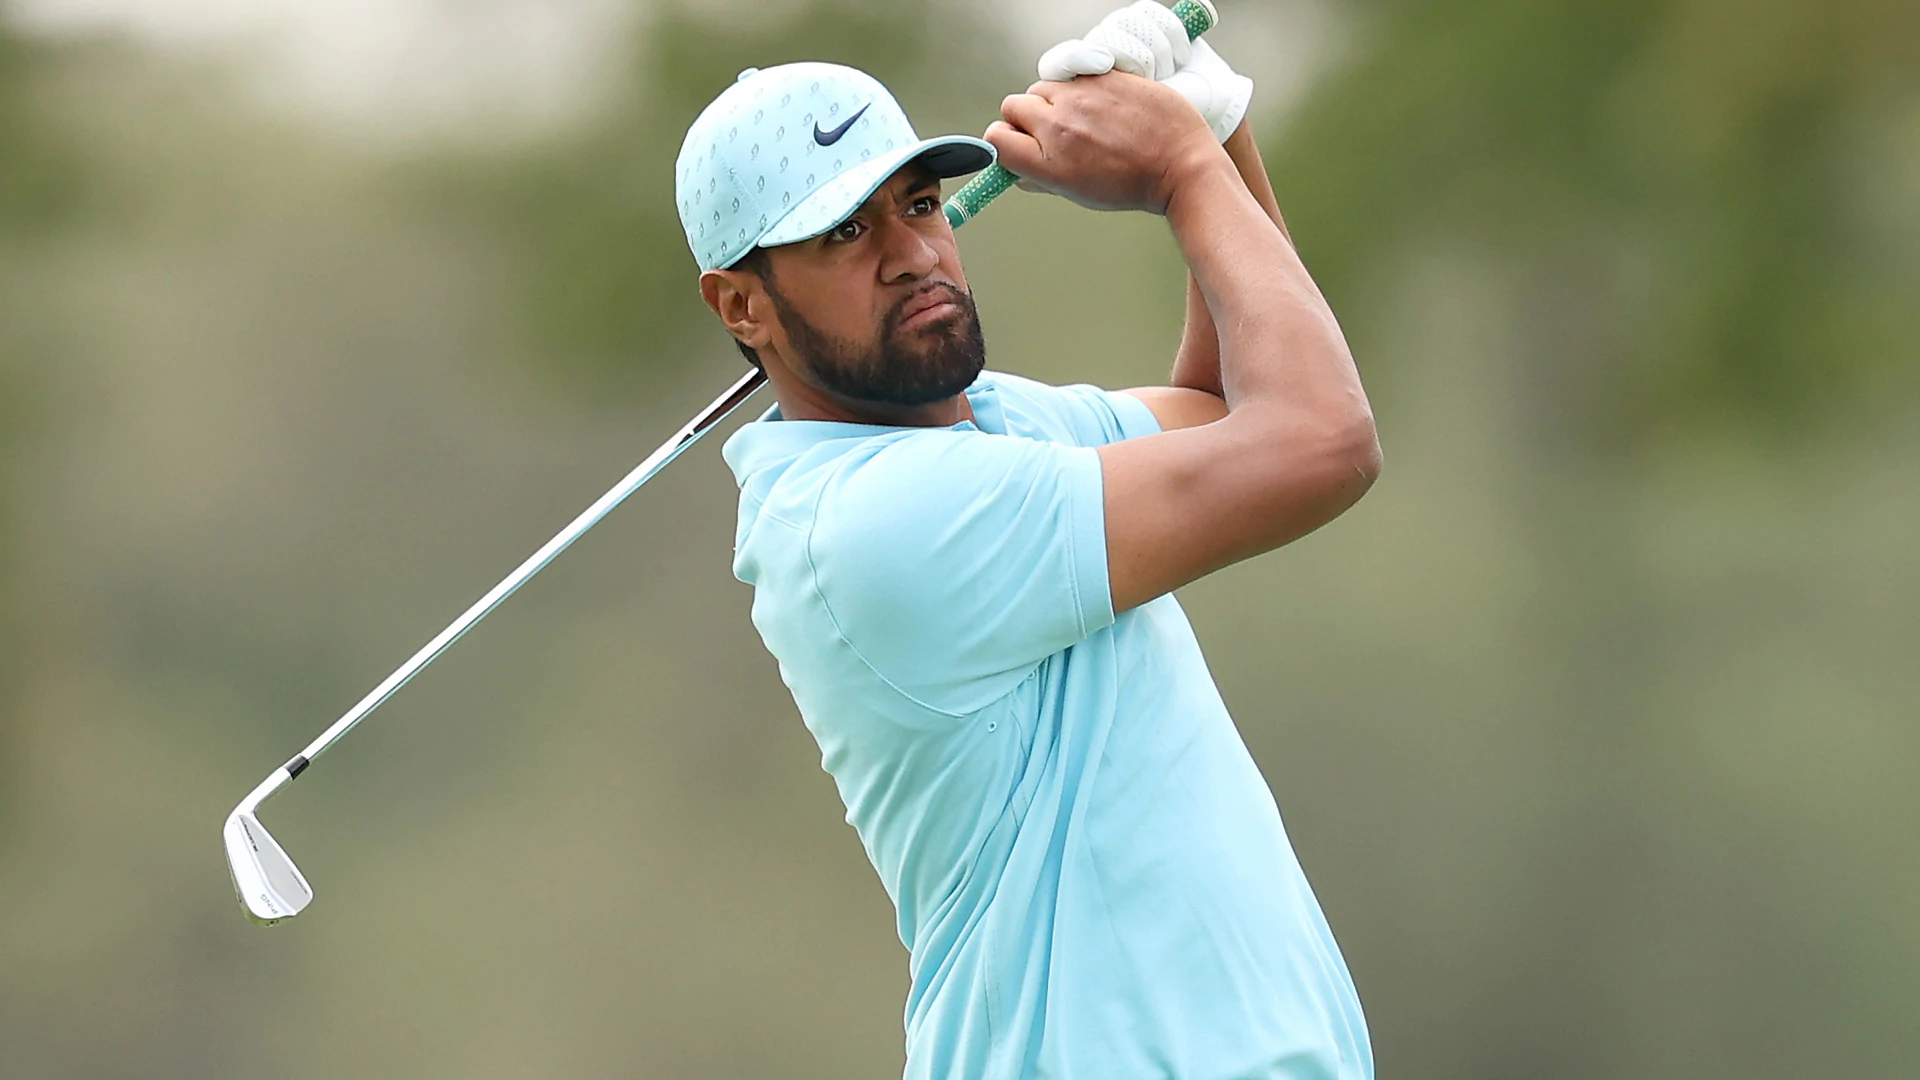 Tony Finau Out of Shriners Hospitals for Children Open After Positive COVID-19 Test